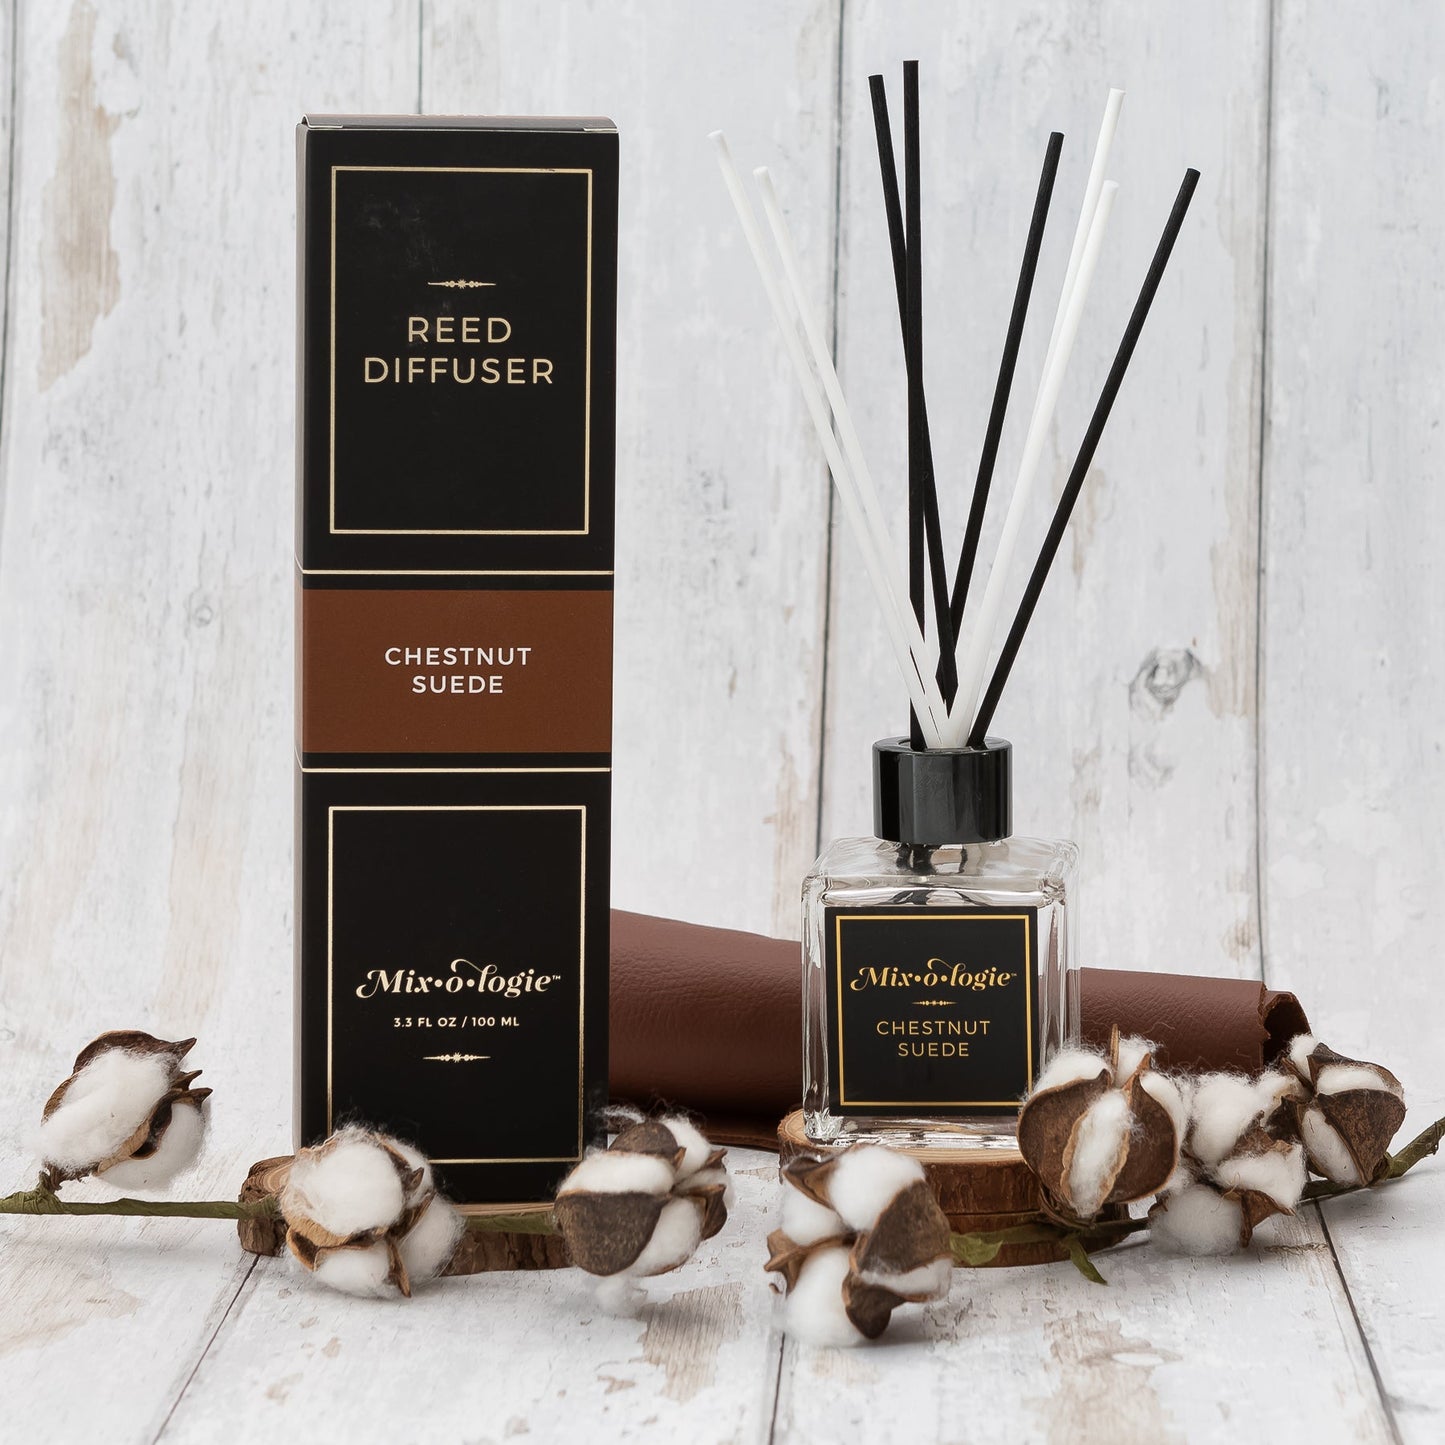 Mixologie Reed Diffuser - Simply Polished Boutique